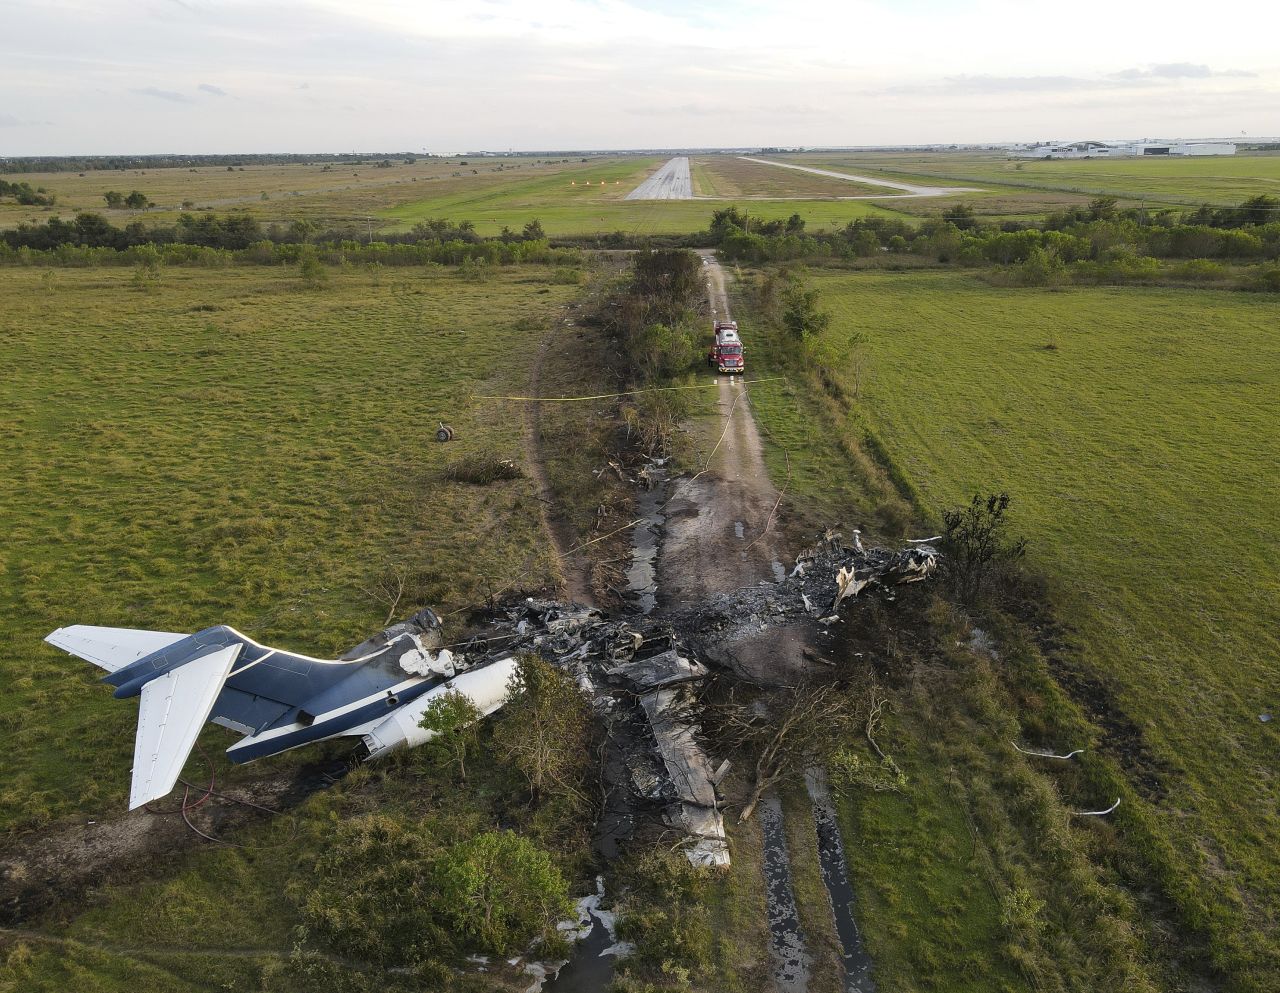 Remnants of an aircraft, which burst into flames when it <a href="https://www.cnn.com/2021/10/19/us/texas-plane-crash/index.html" target="_blank">struck a fence during takeoff</a>, lie in a field near Houston Executive Airport in Brookshire, Texas, on Tuesday, October 19. No major injuries were reported in the crash.